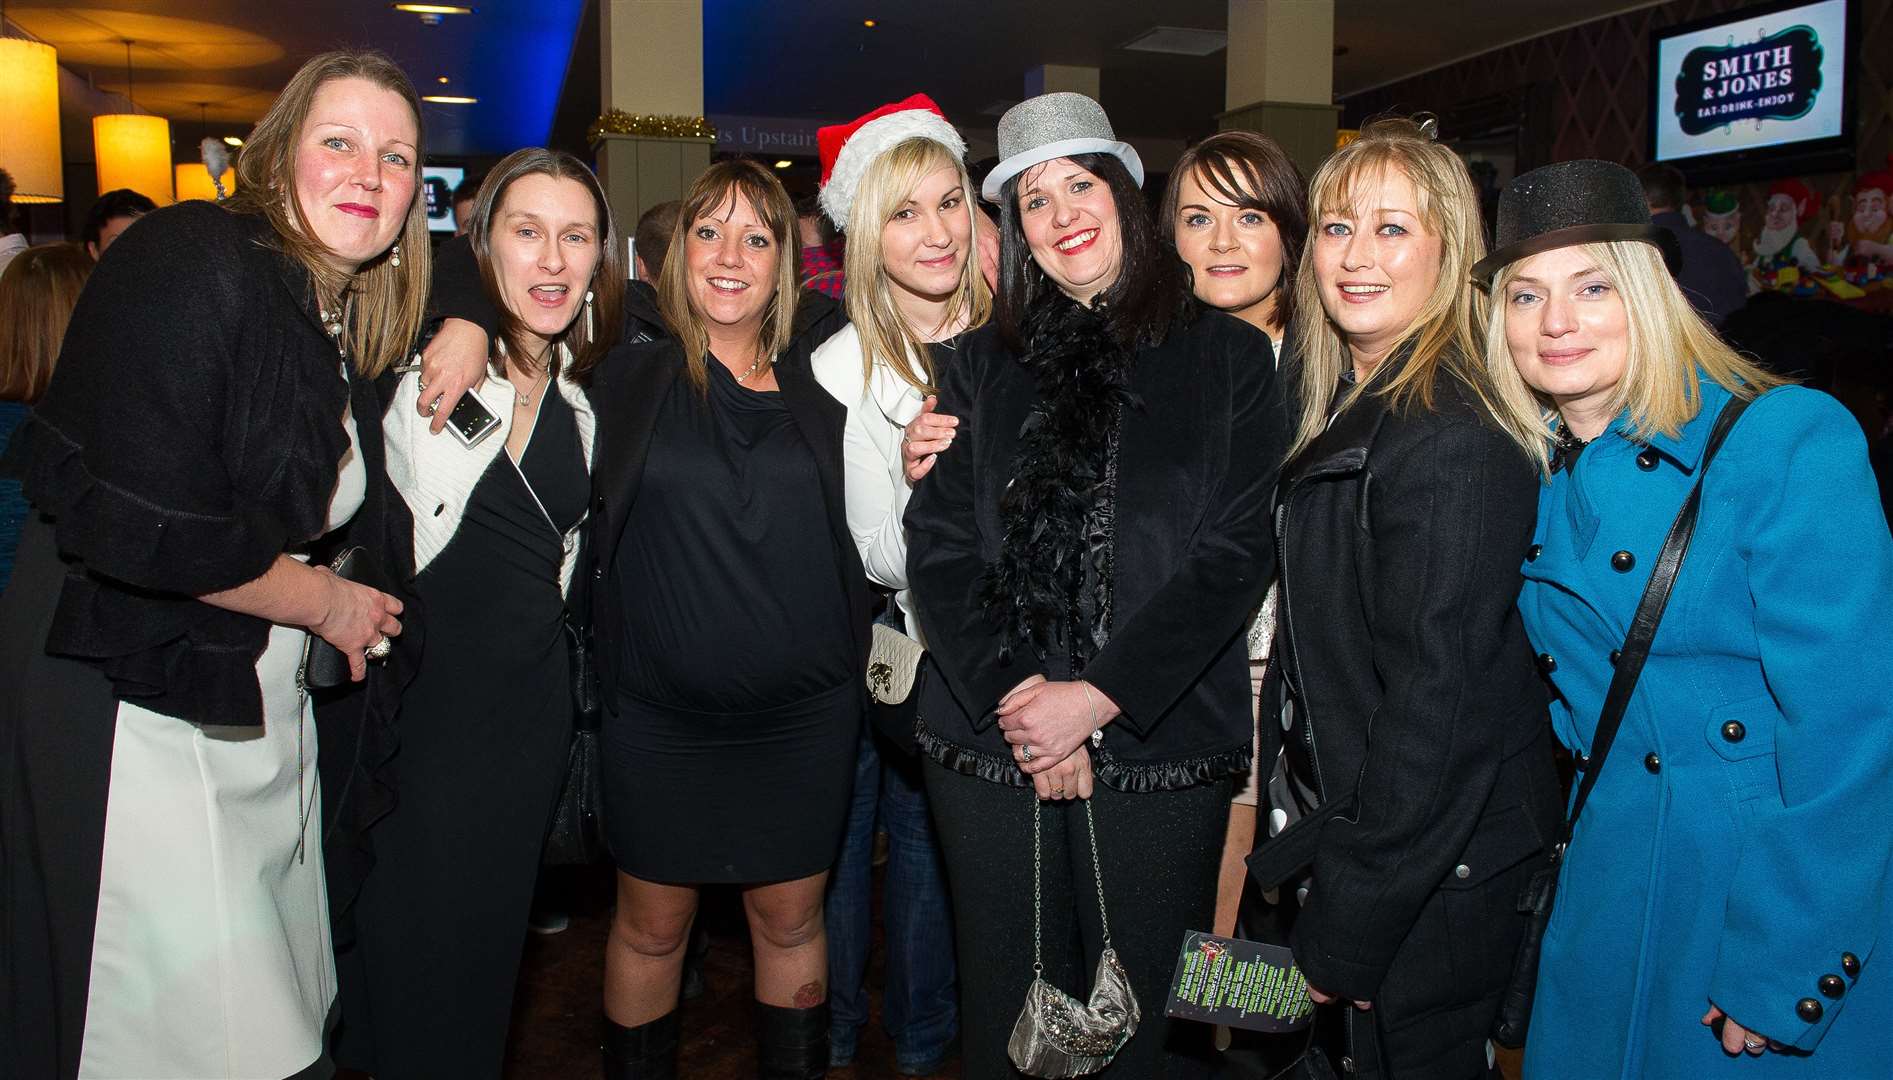 CitySeen 15DEC..Wimbery Way Childcare Centre girls on a Xmas night out at Smith & Jones...Picture: Callum Mackay. Image No. 0020422.